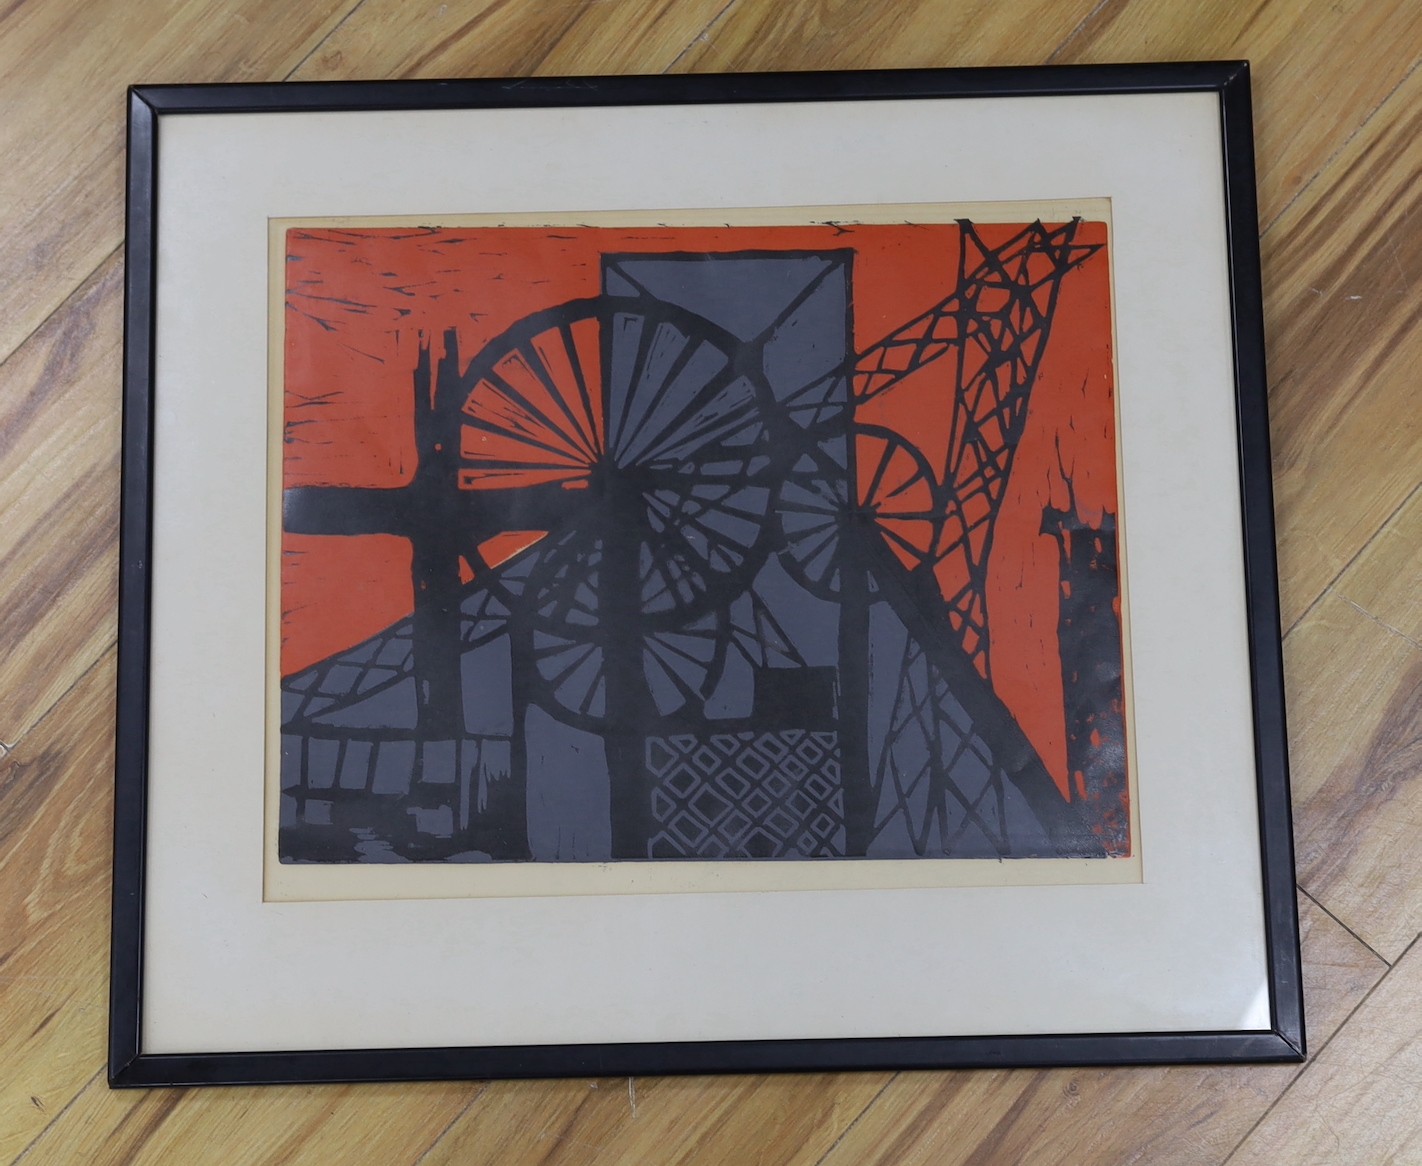 Modern British, linocut, Colliery scene, signature and numbering faded, 37 x 38.5 cm.